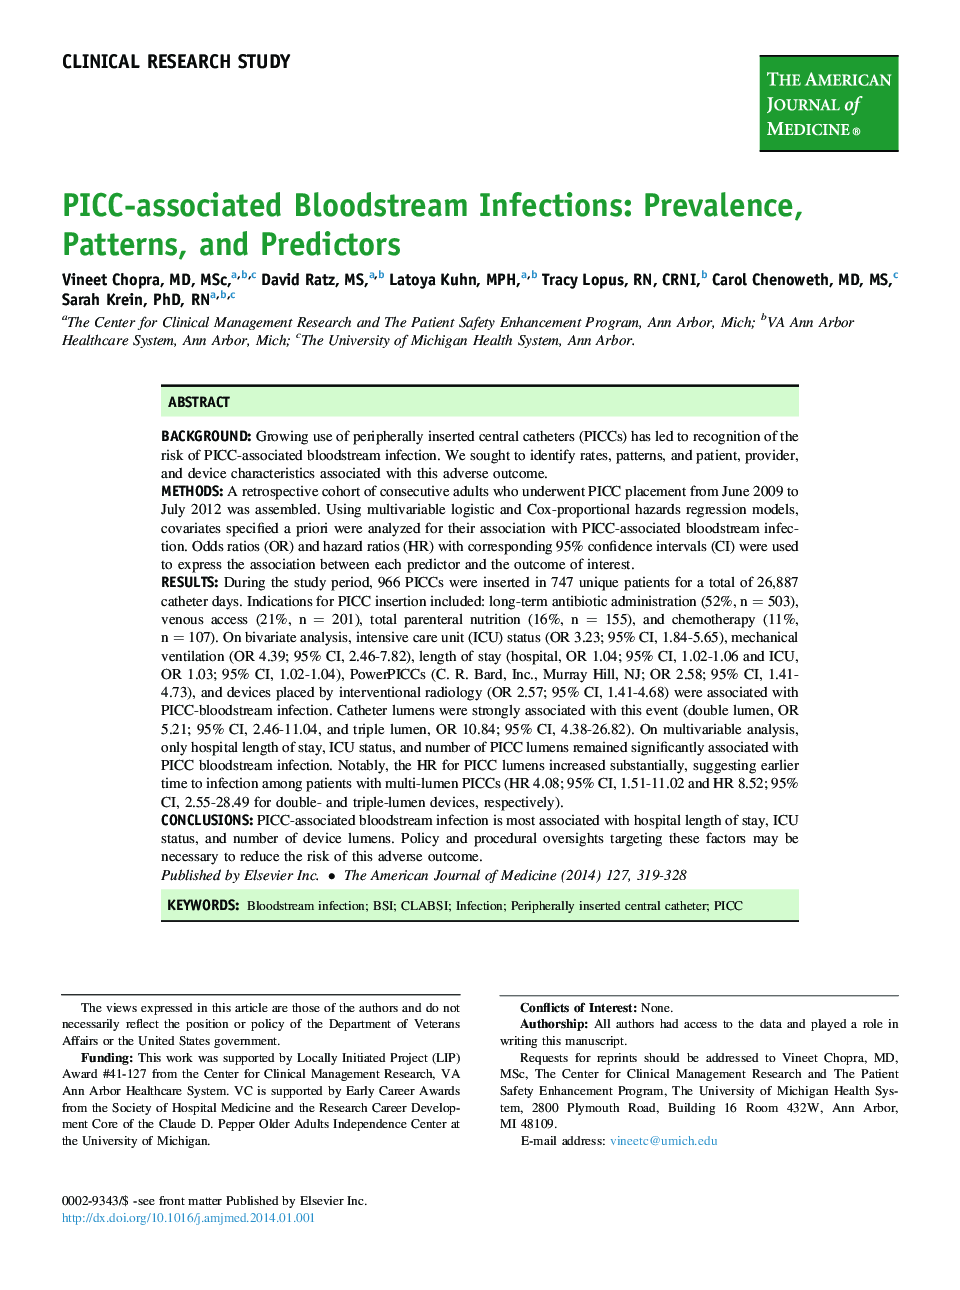 PICC-associated Bloodstream Infections: Prevalence, Patterns, and Predictors 